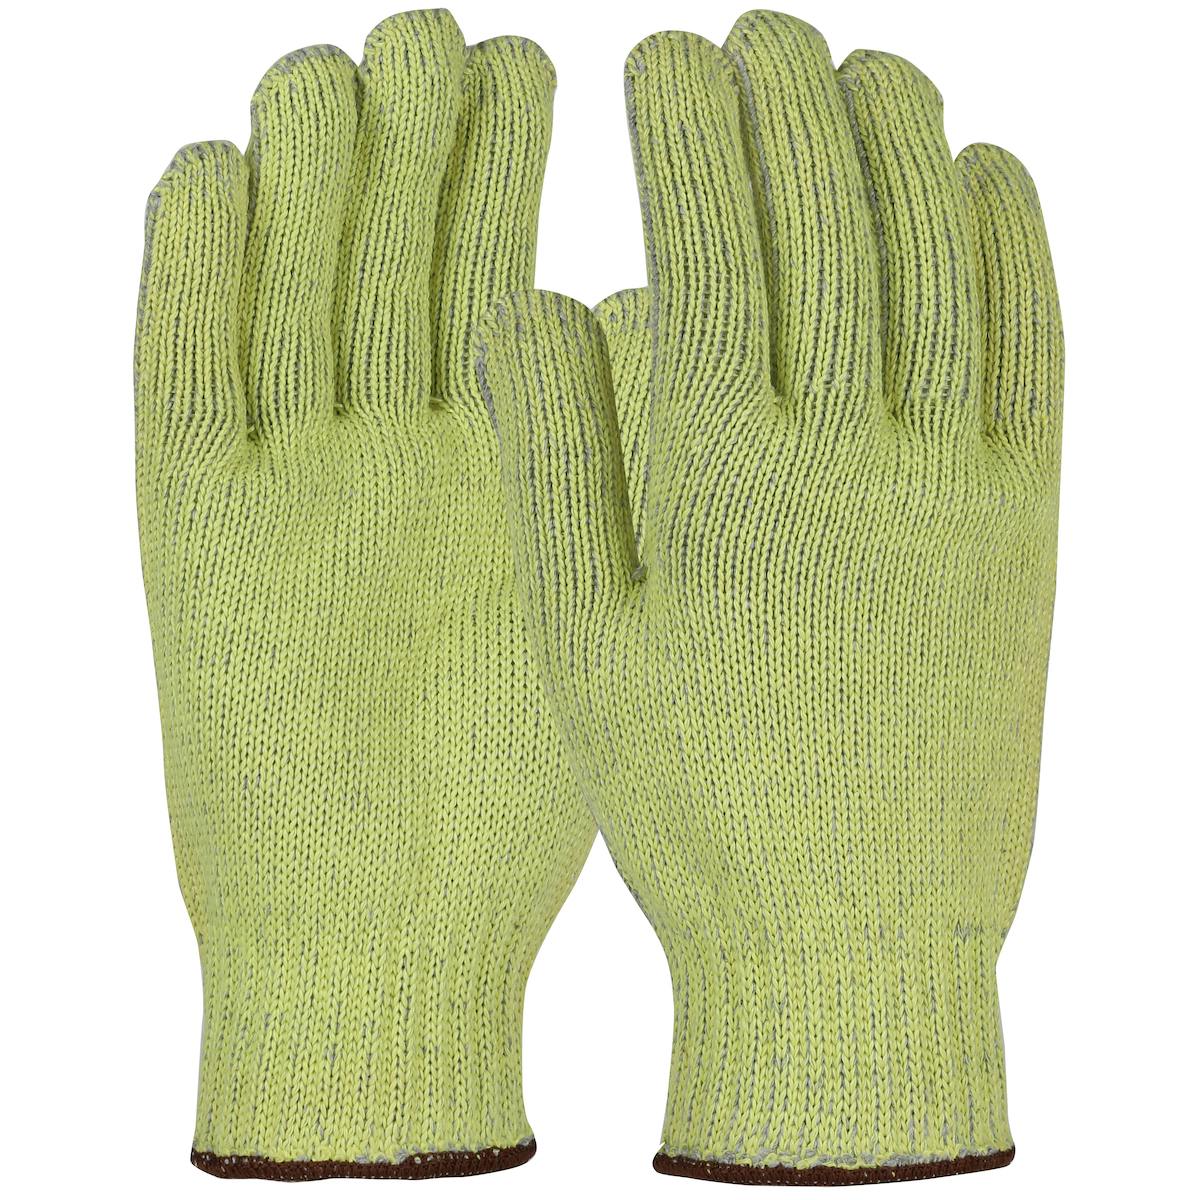 Kut Gard® Seamless Knit ATA® / Aramid Blended Glove with Cotton/Polyester Plating - Heavy Weight (MATA500)_0